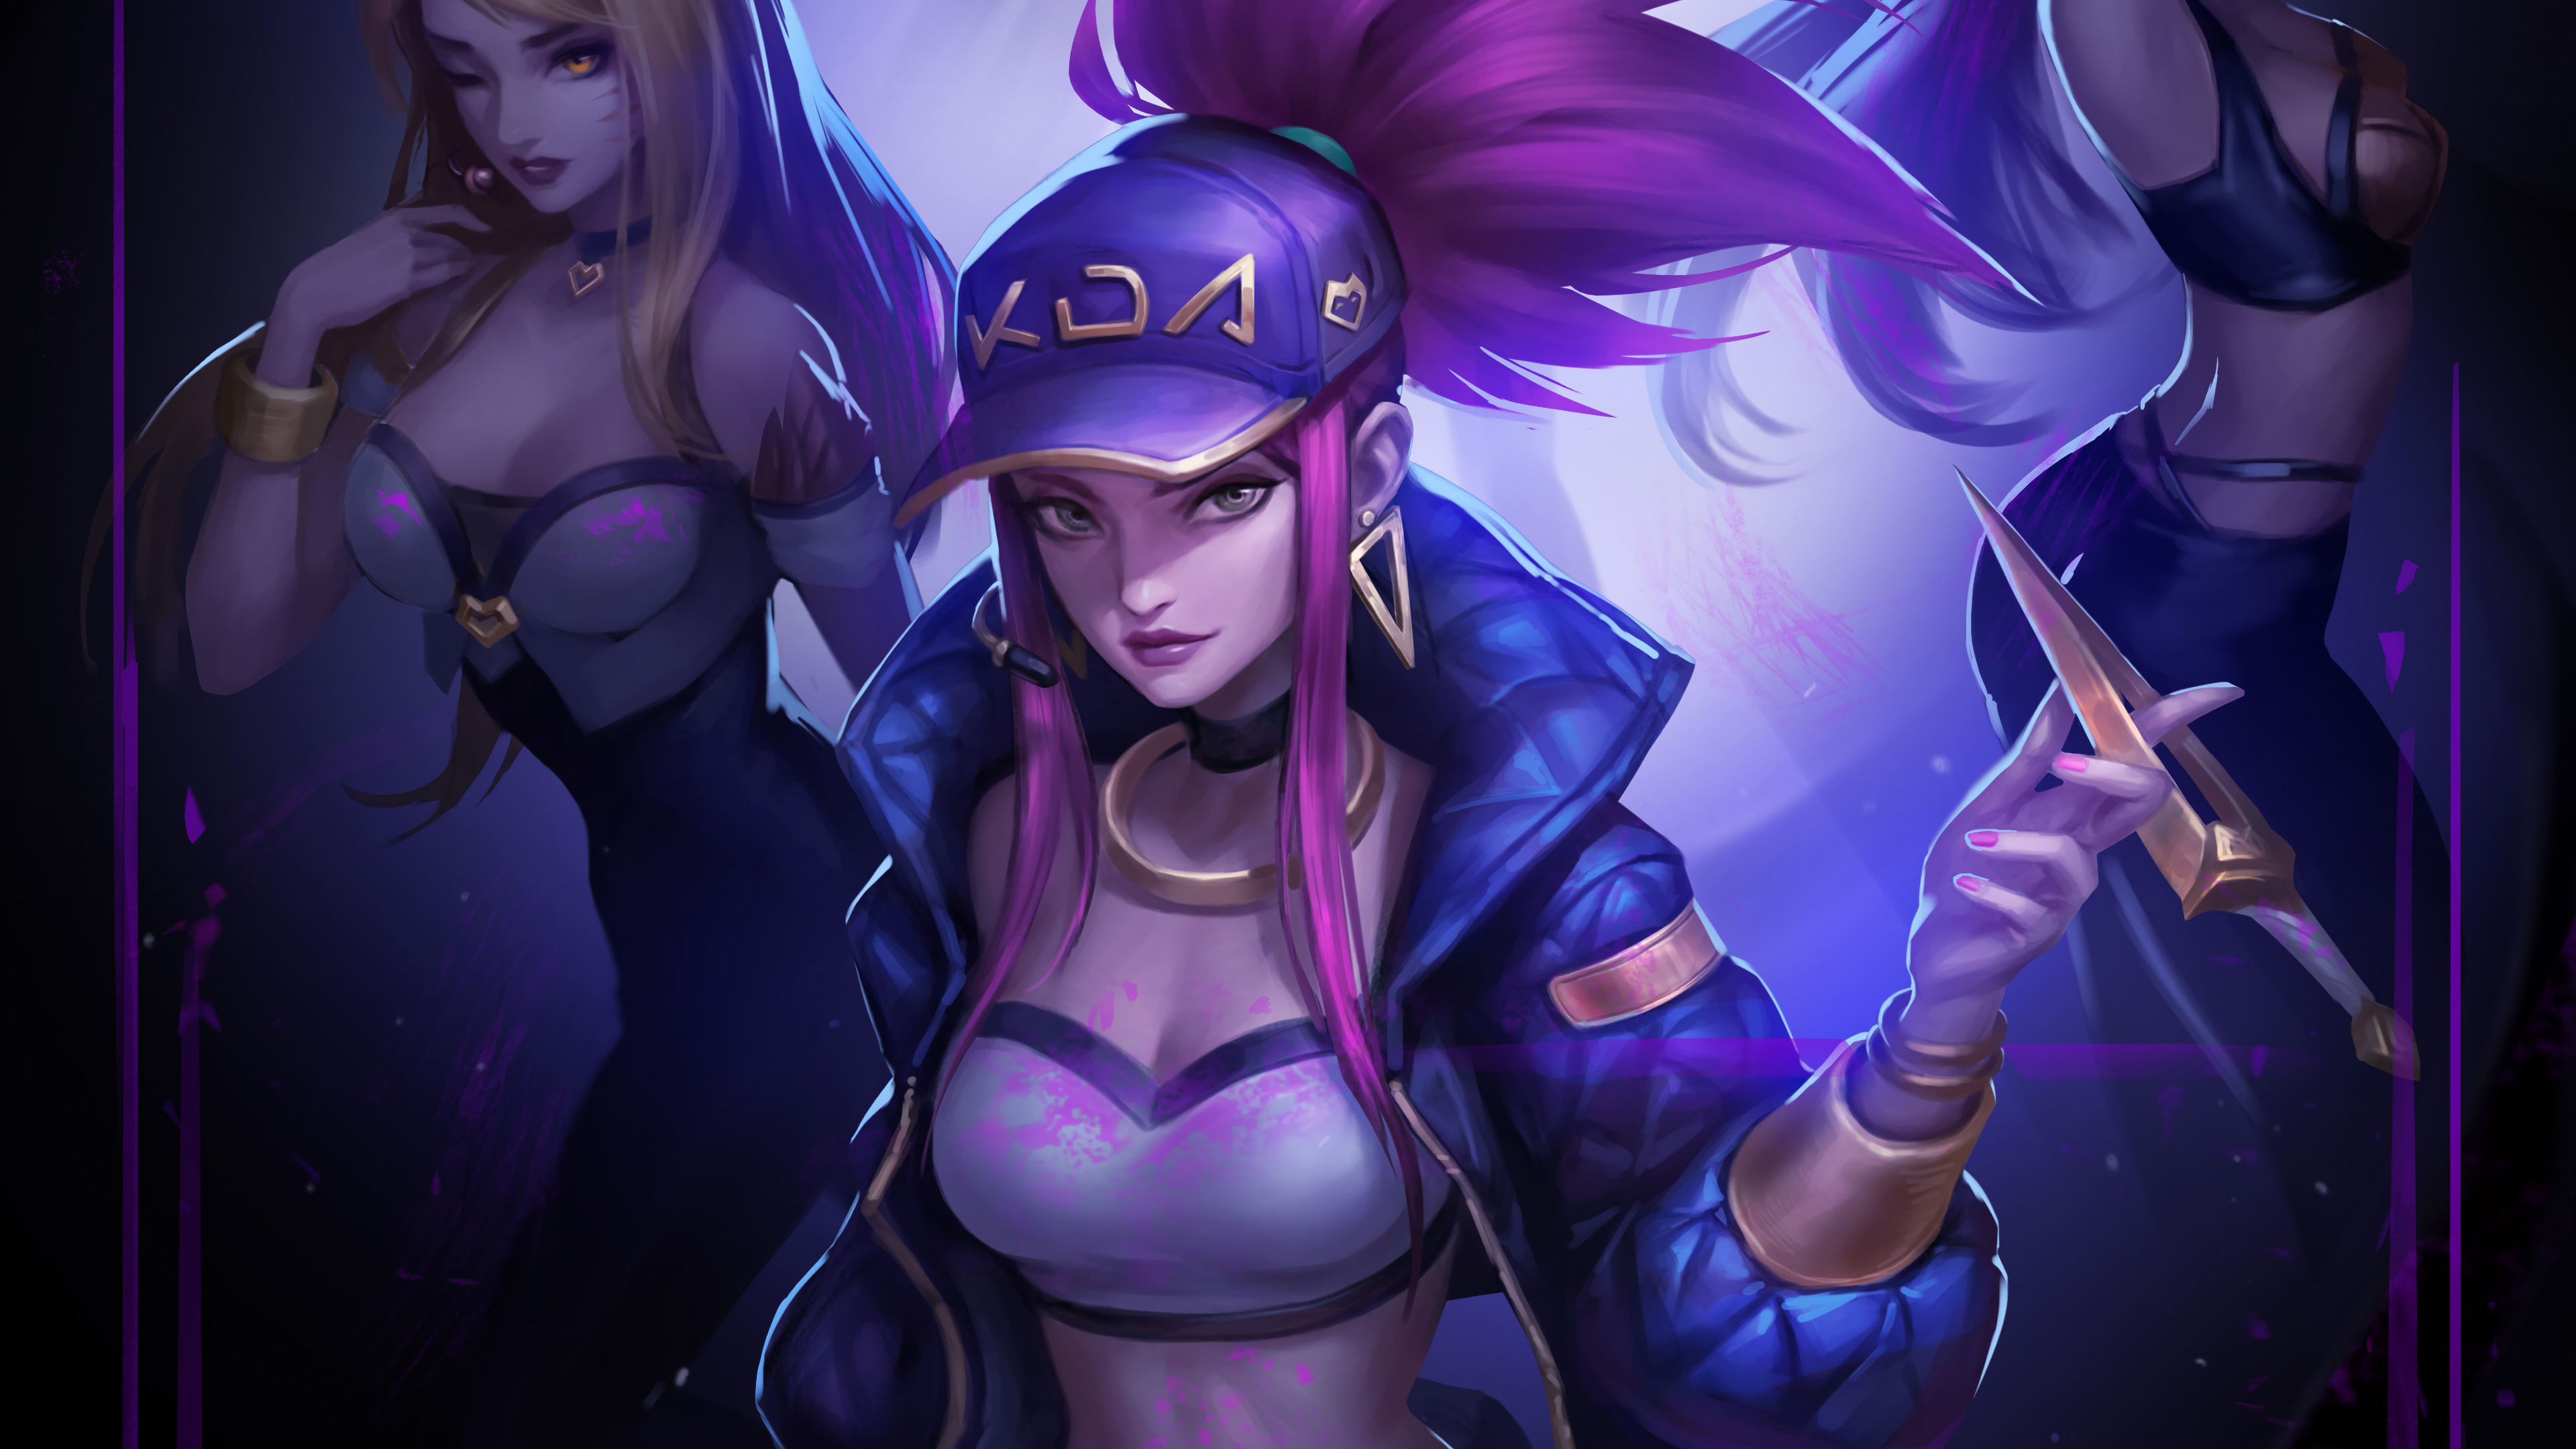 Kda akali league of legends k hd games k wallpapers images backgrounds photos and pictures